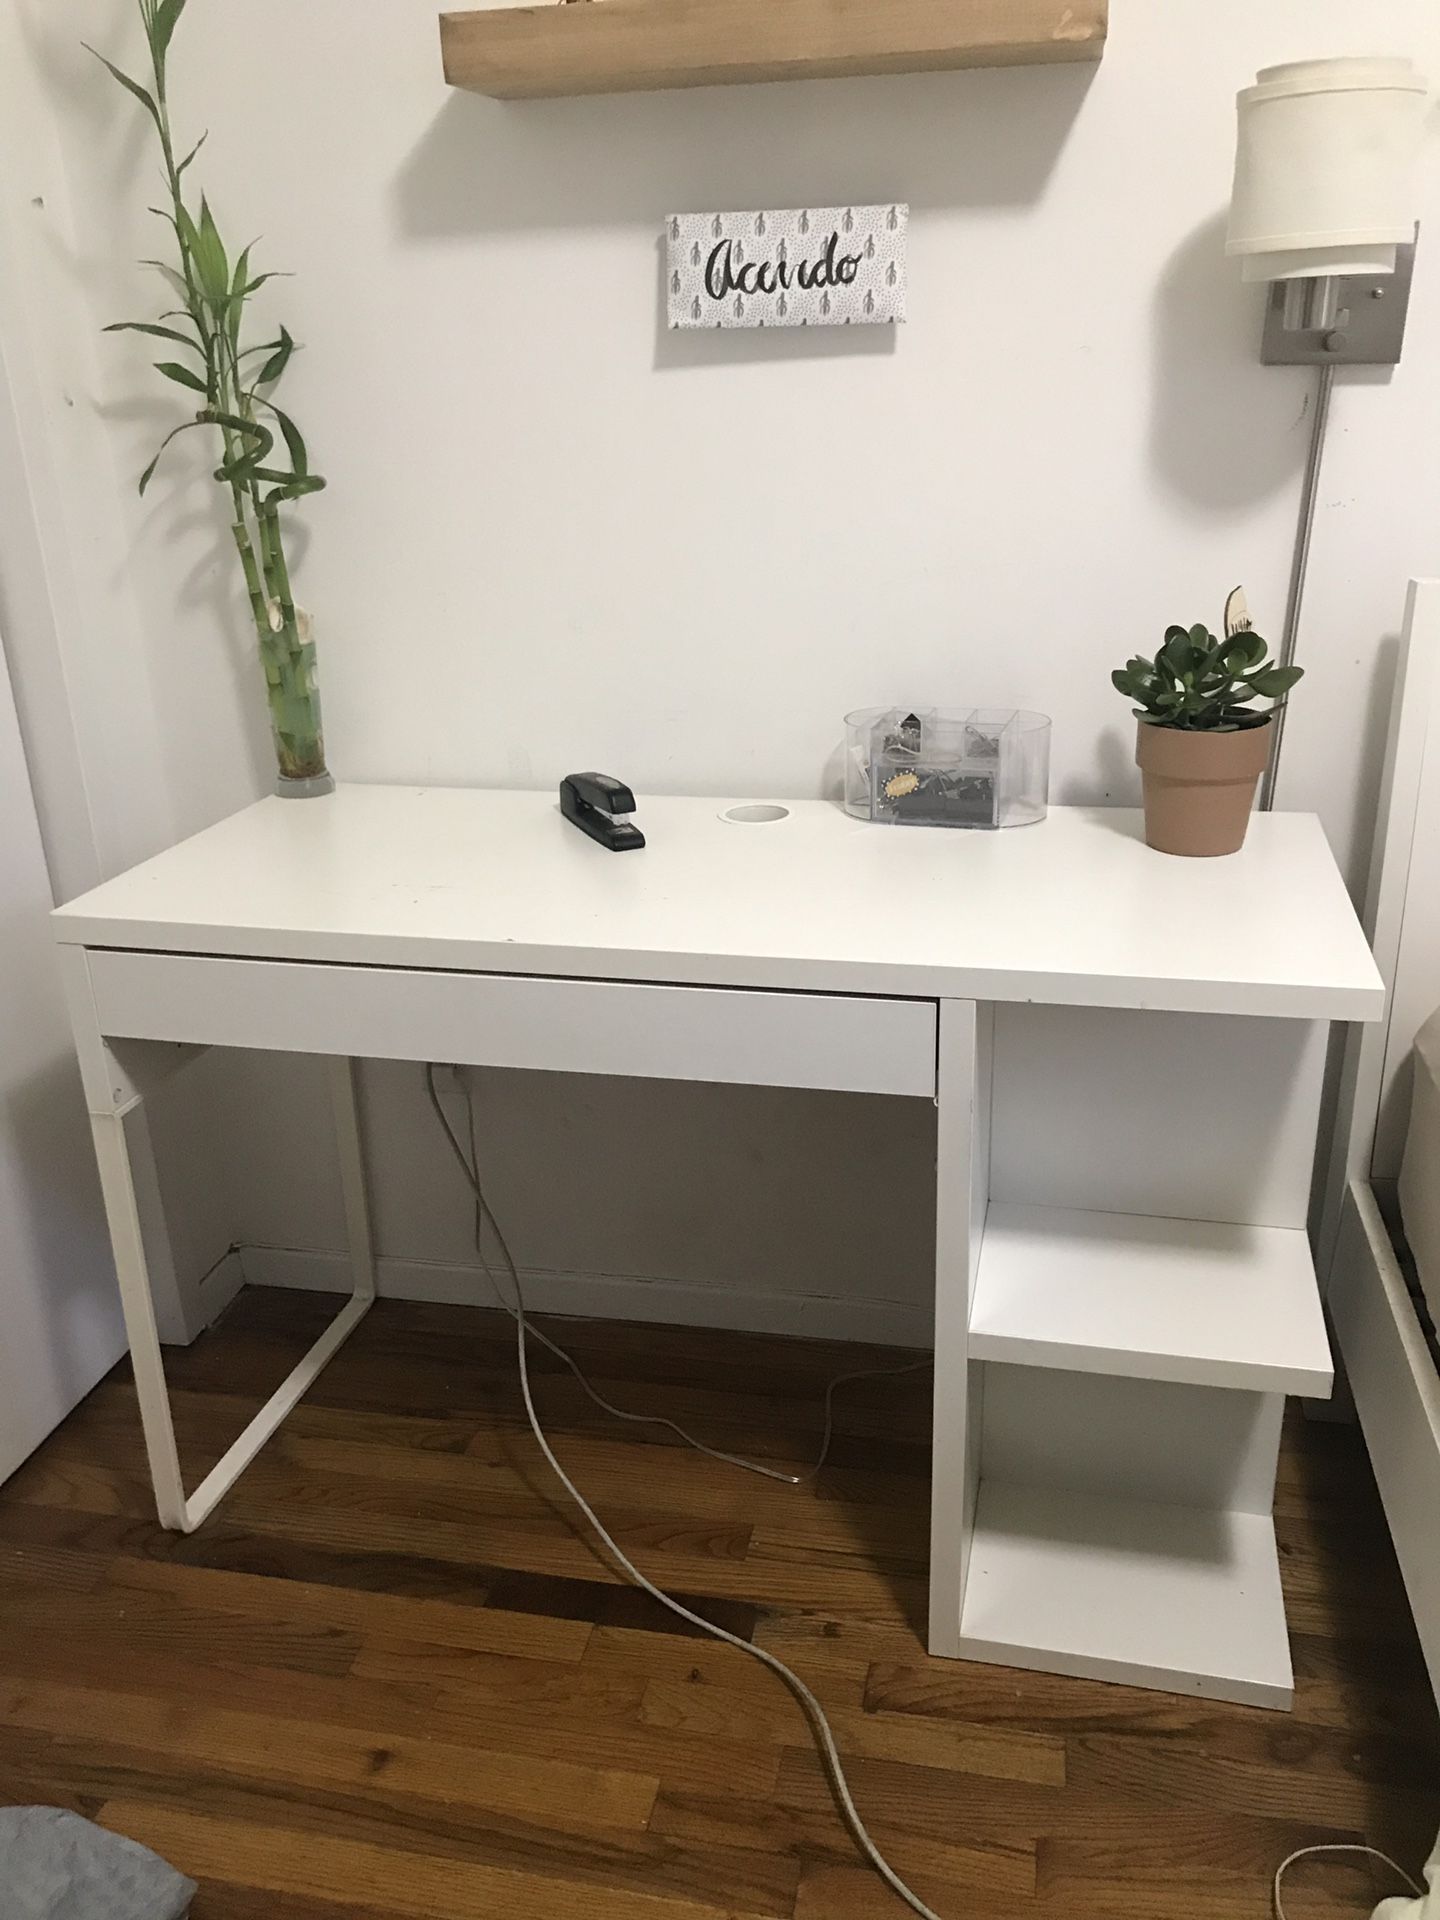 Used Ikea desk for sale on Upper West Side and Broadway. 50 - price negotiable